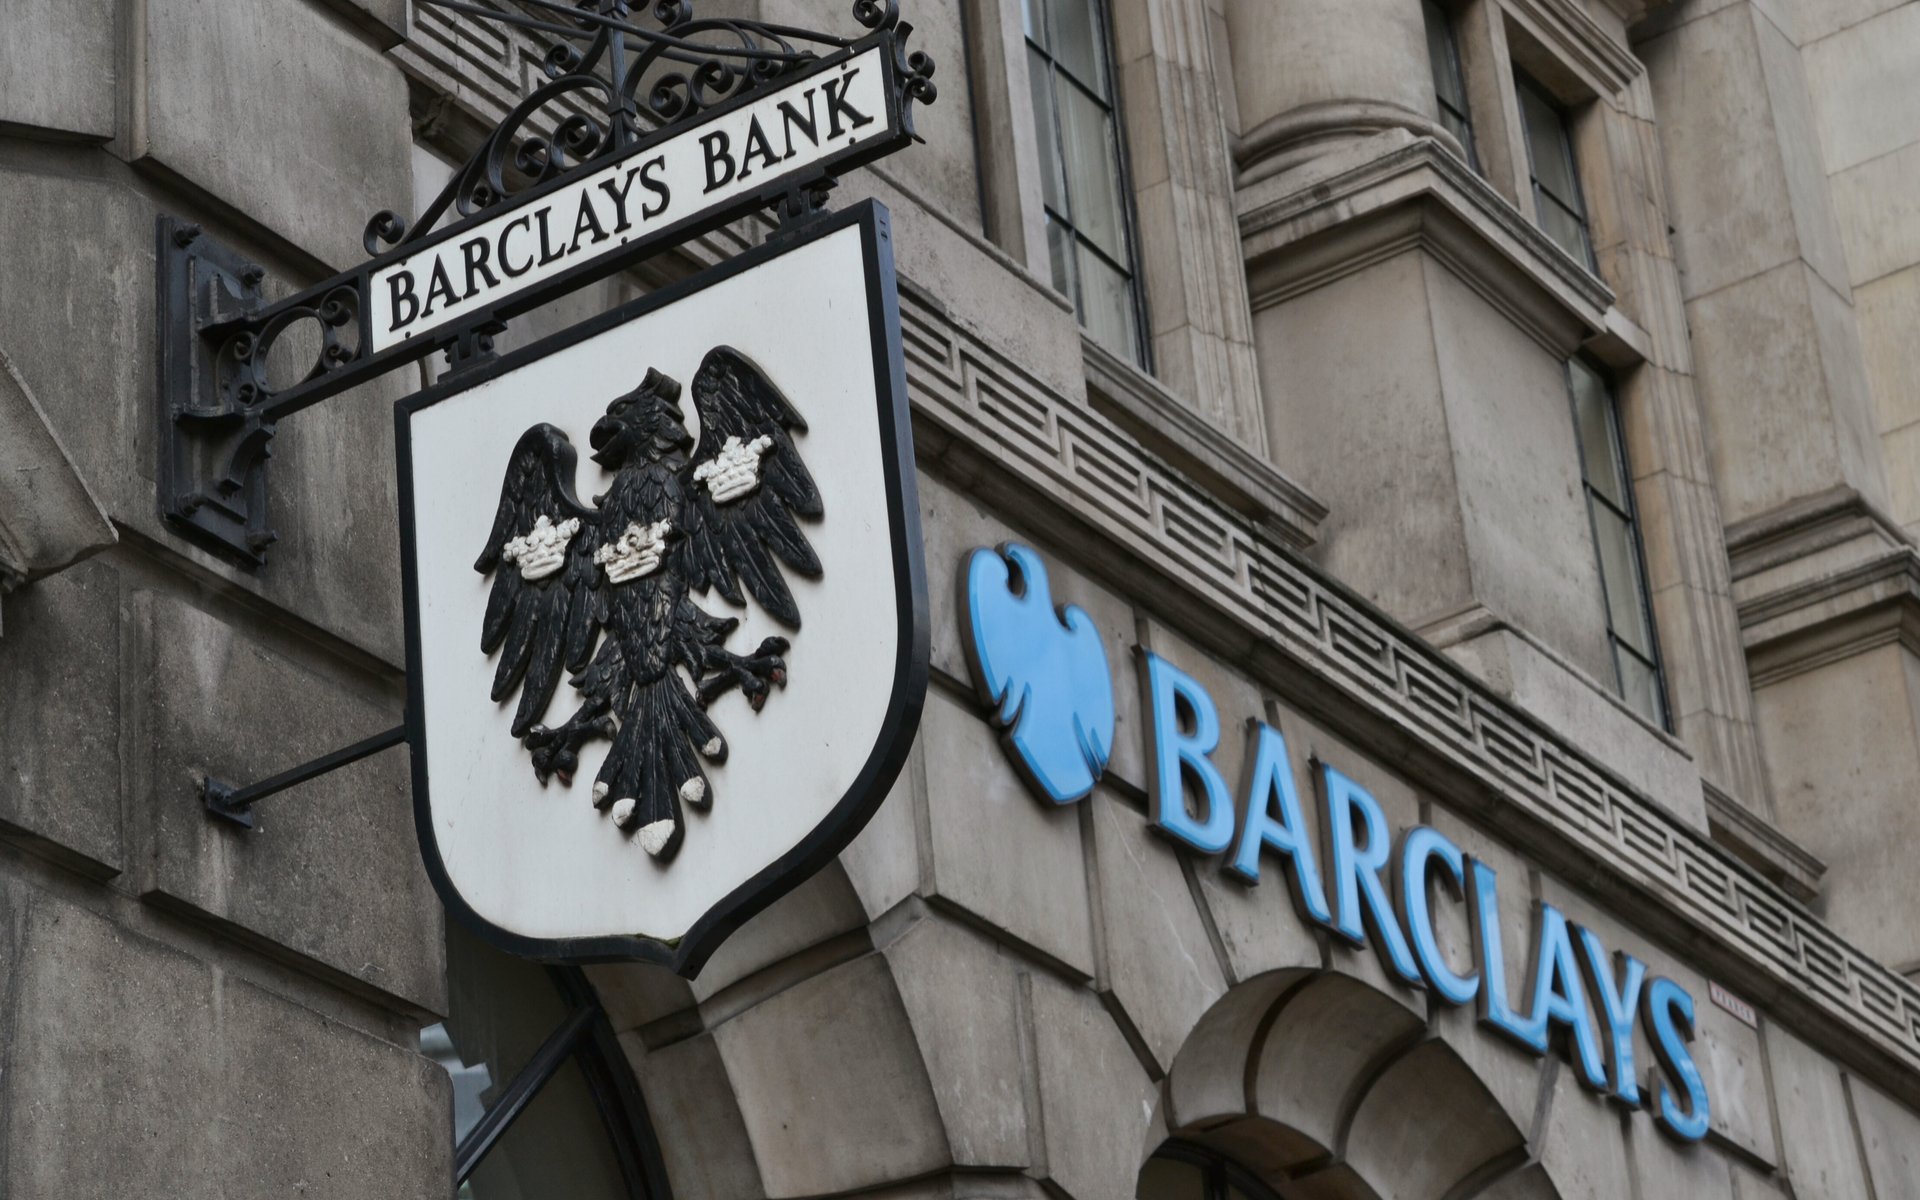 Barclays, Citigroup, and Other Big Banks Sign Up for a Trial Blockchain Project